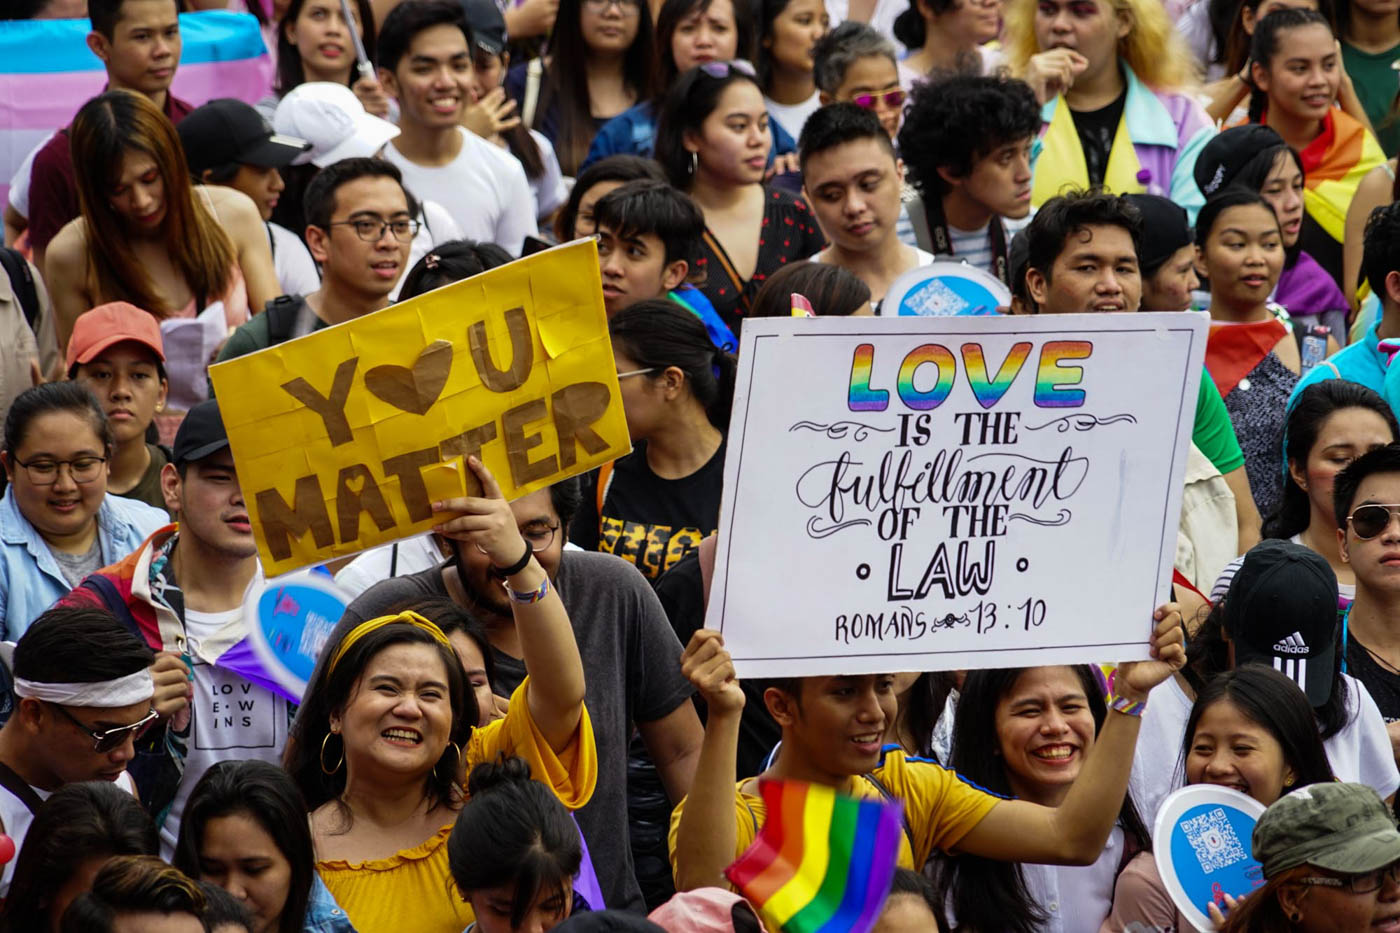 SIGN LANGUAGE. The LGBT community and its allies spread messages of love through signs at Metro Manila Pride 2018. Photo by Jire Carreon/Rappler 